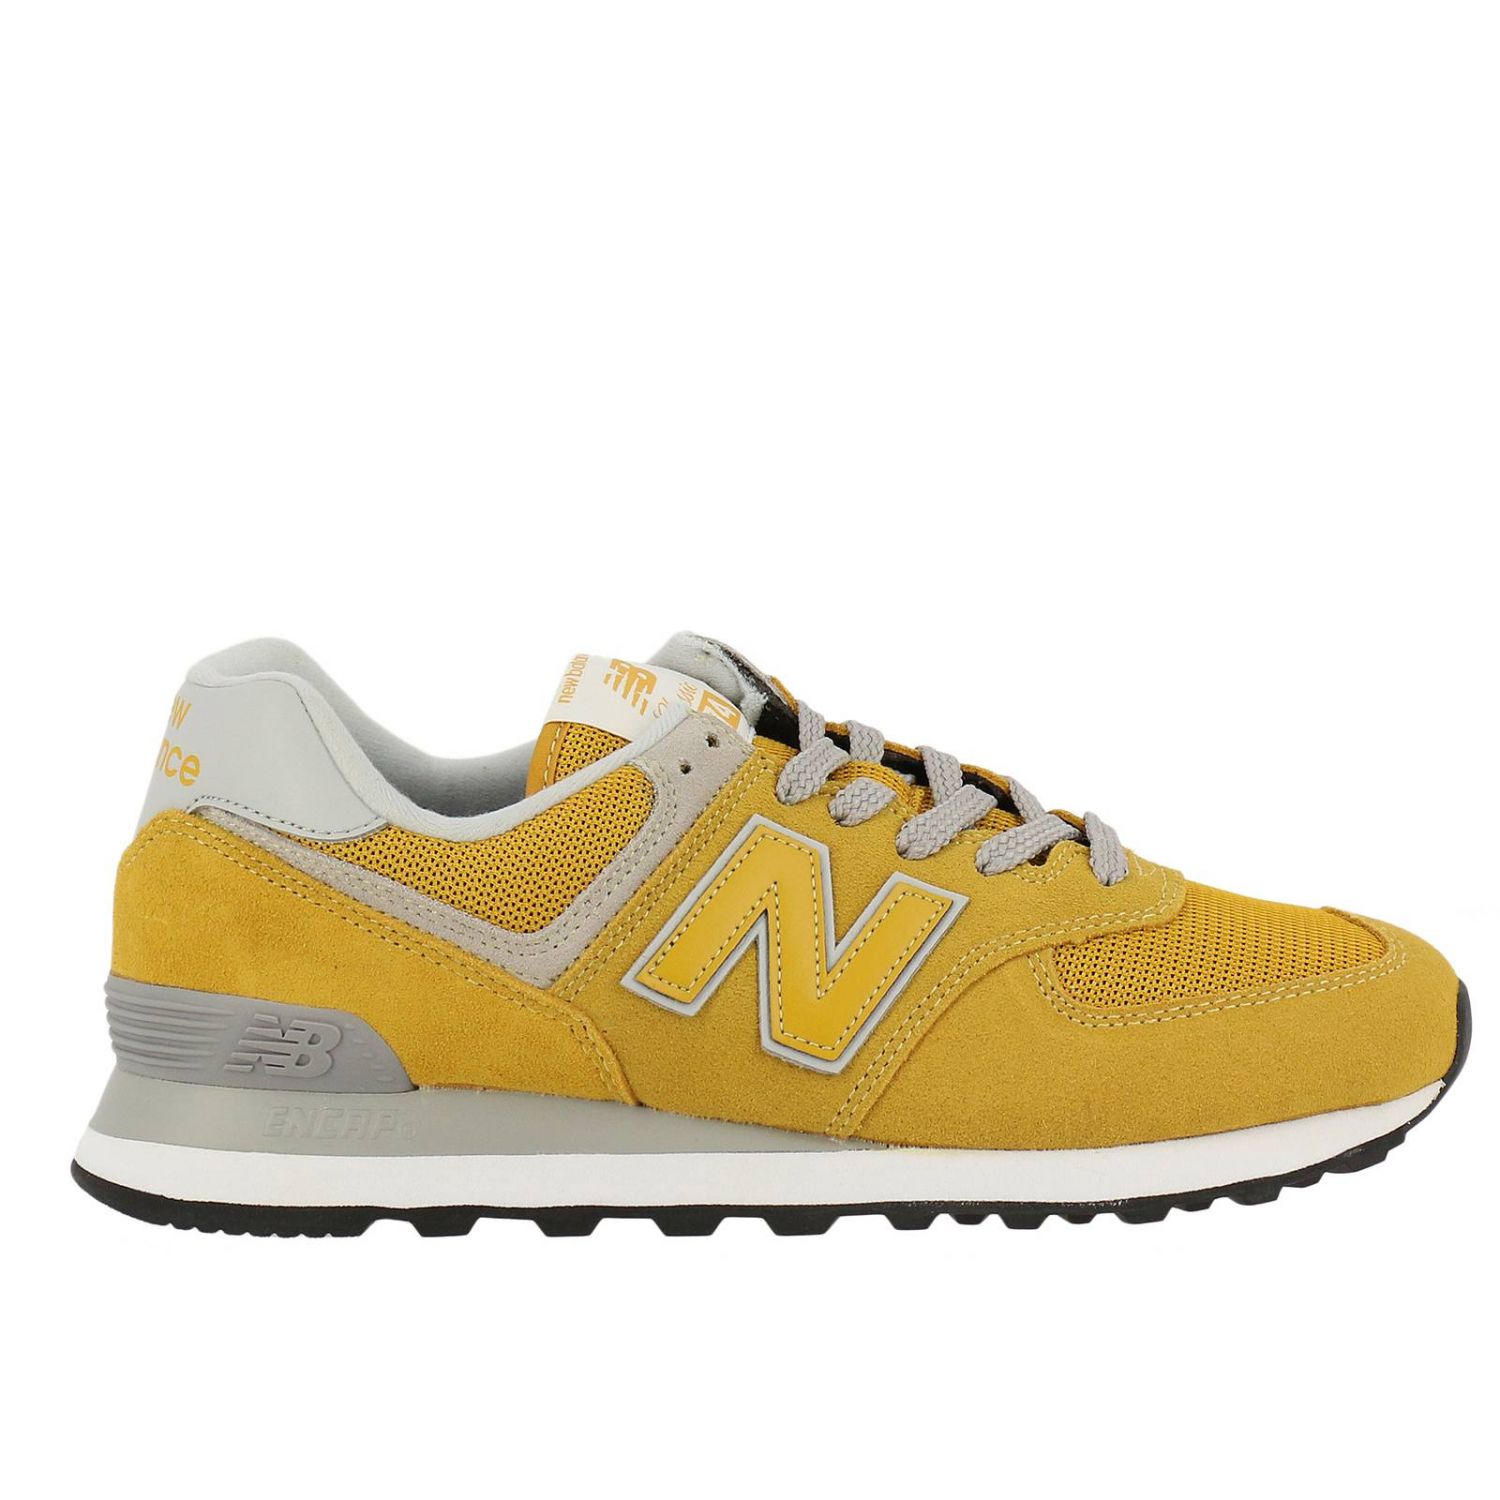 New Balance Outlet: Shoes men | Trainers New Balance Men Yellow ...